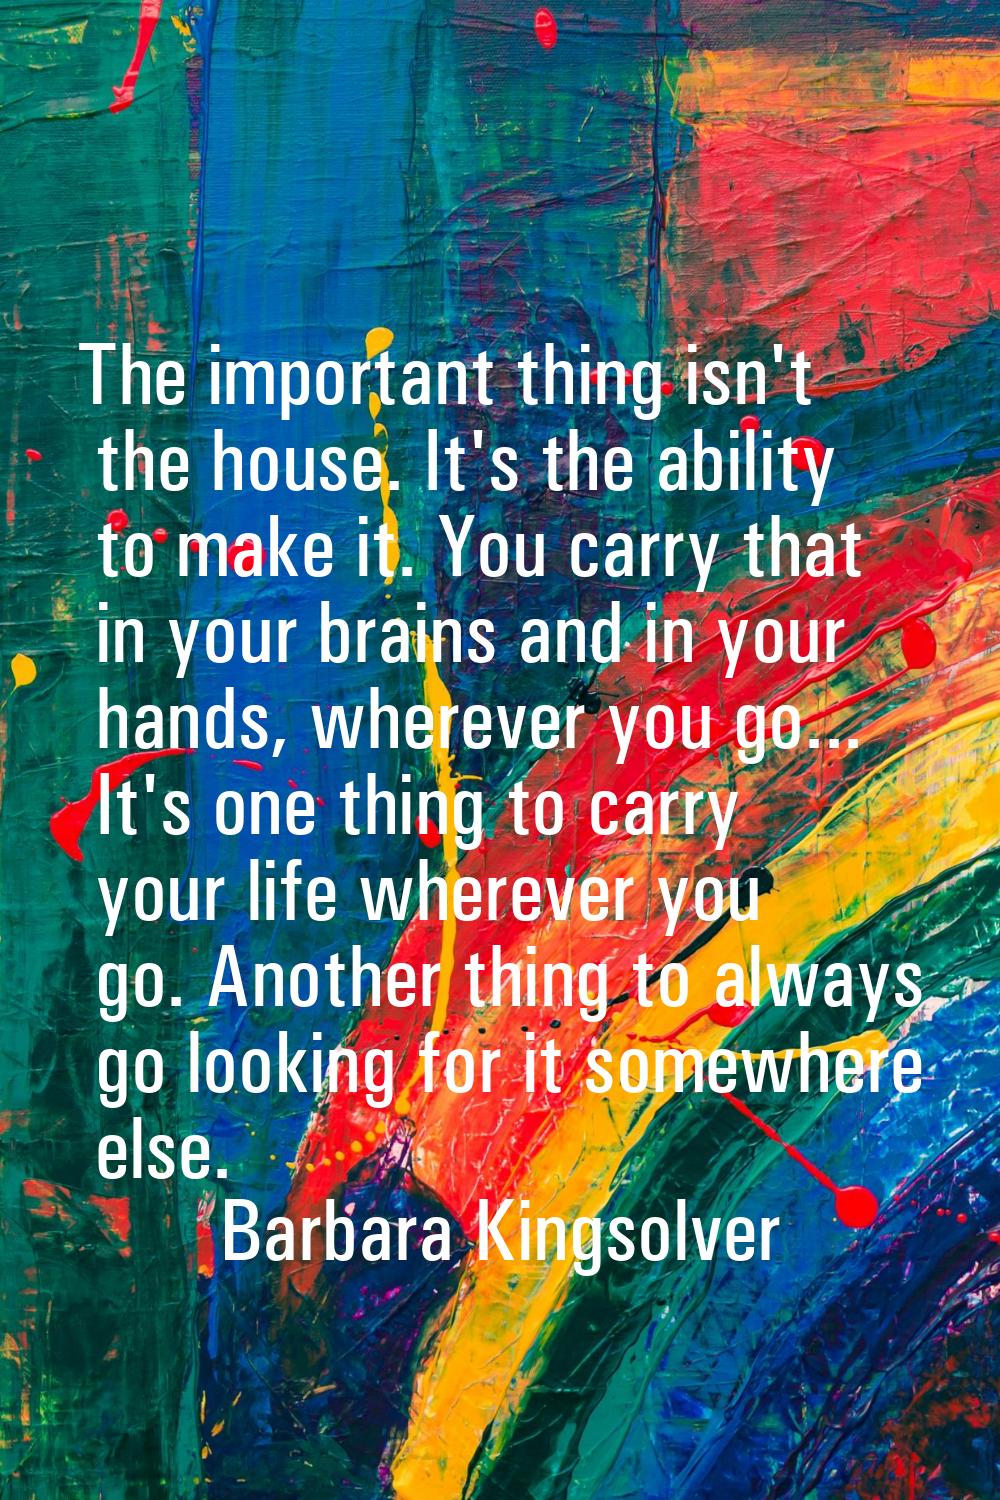 The important thing isn't the house. It's the ability to make it. You carry that in your brains and